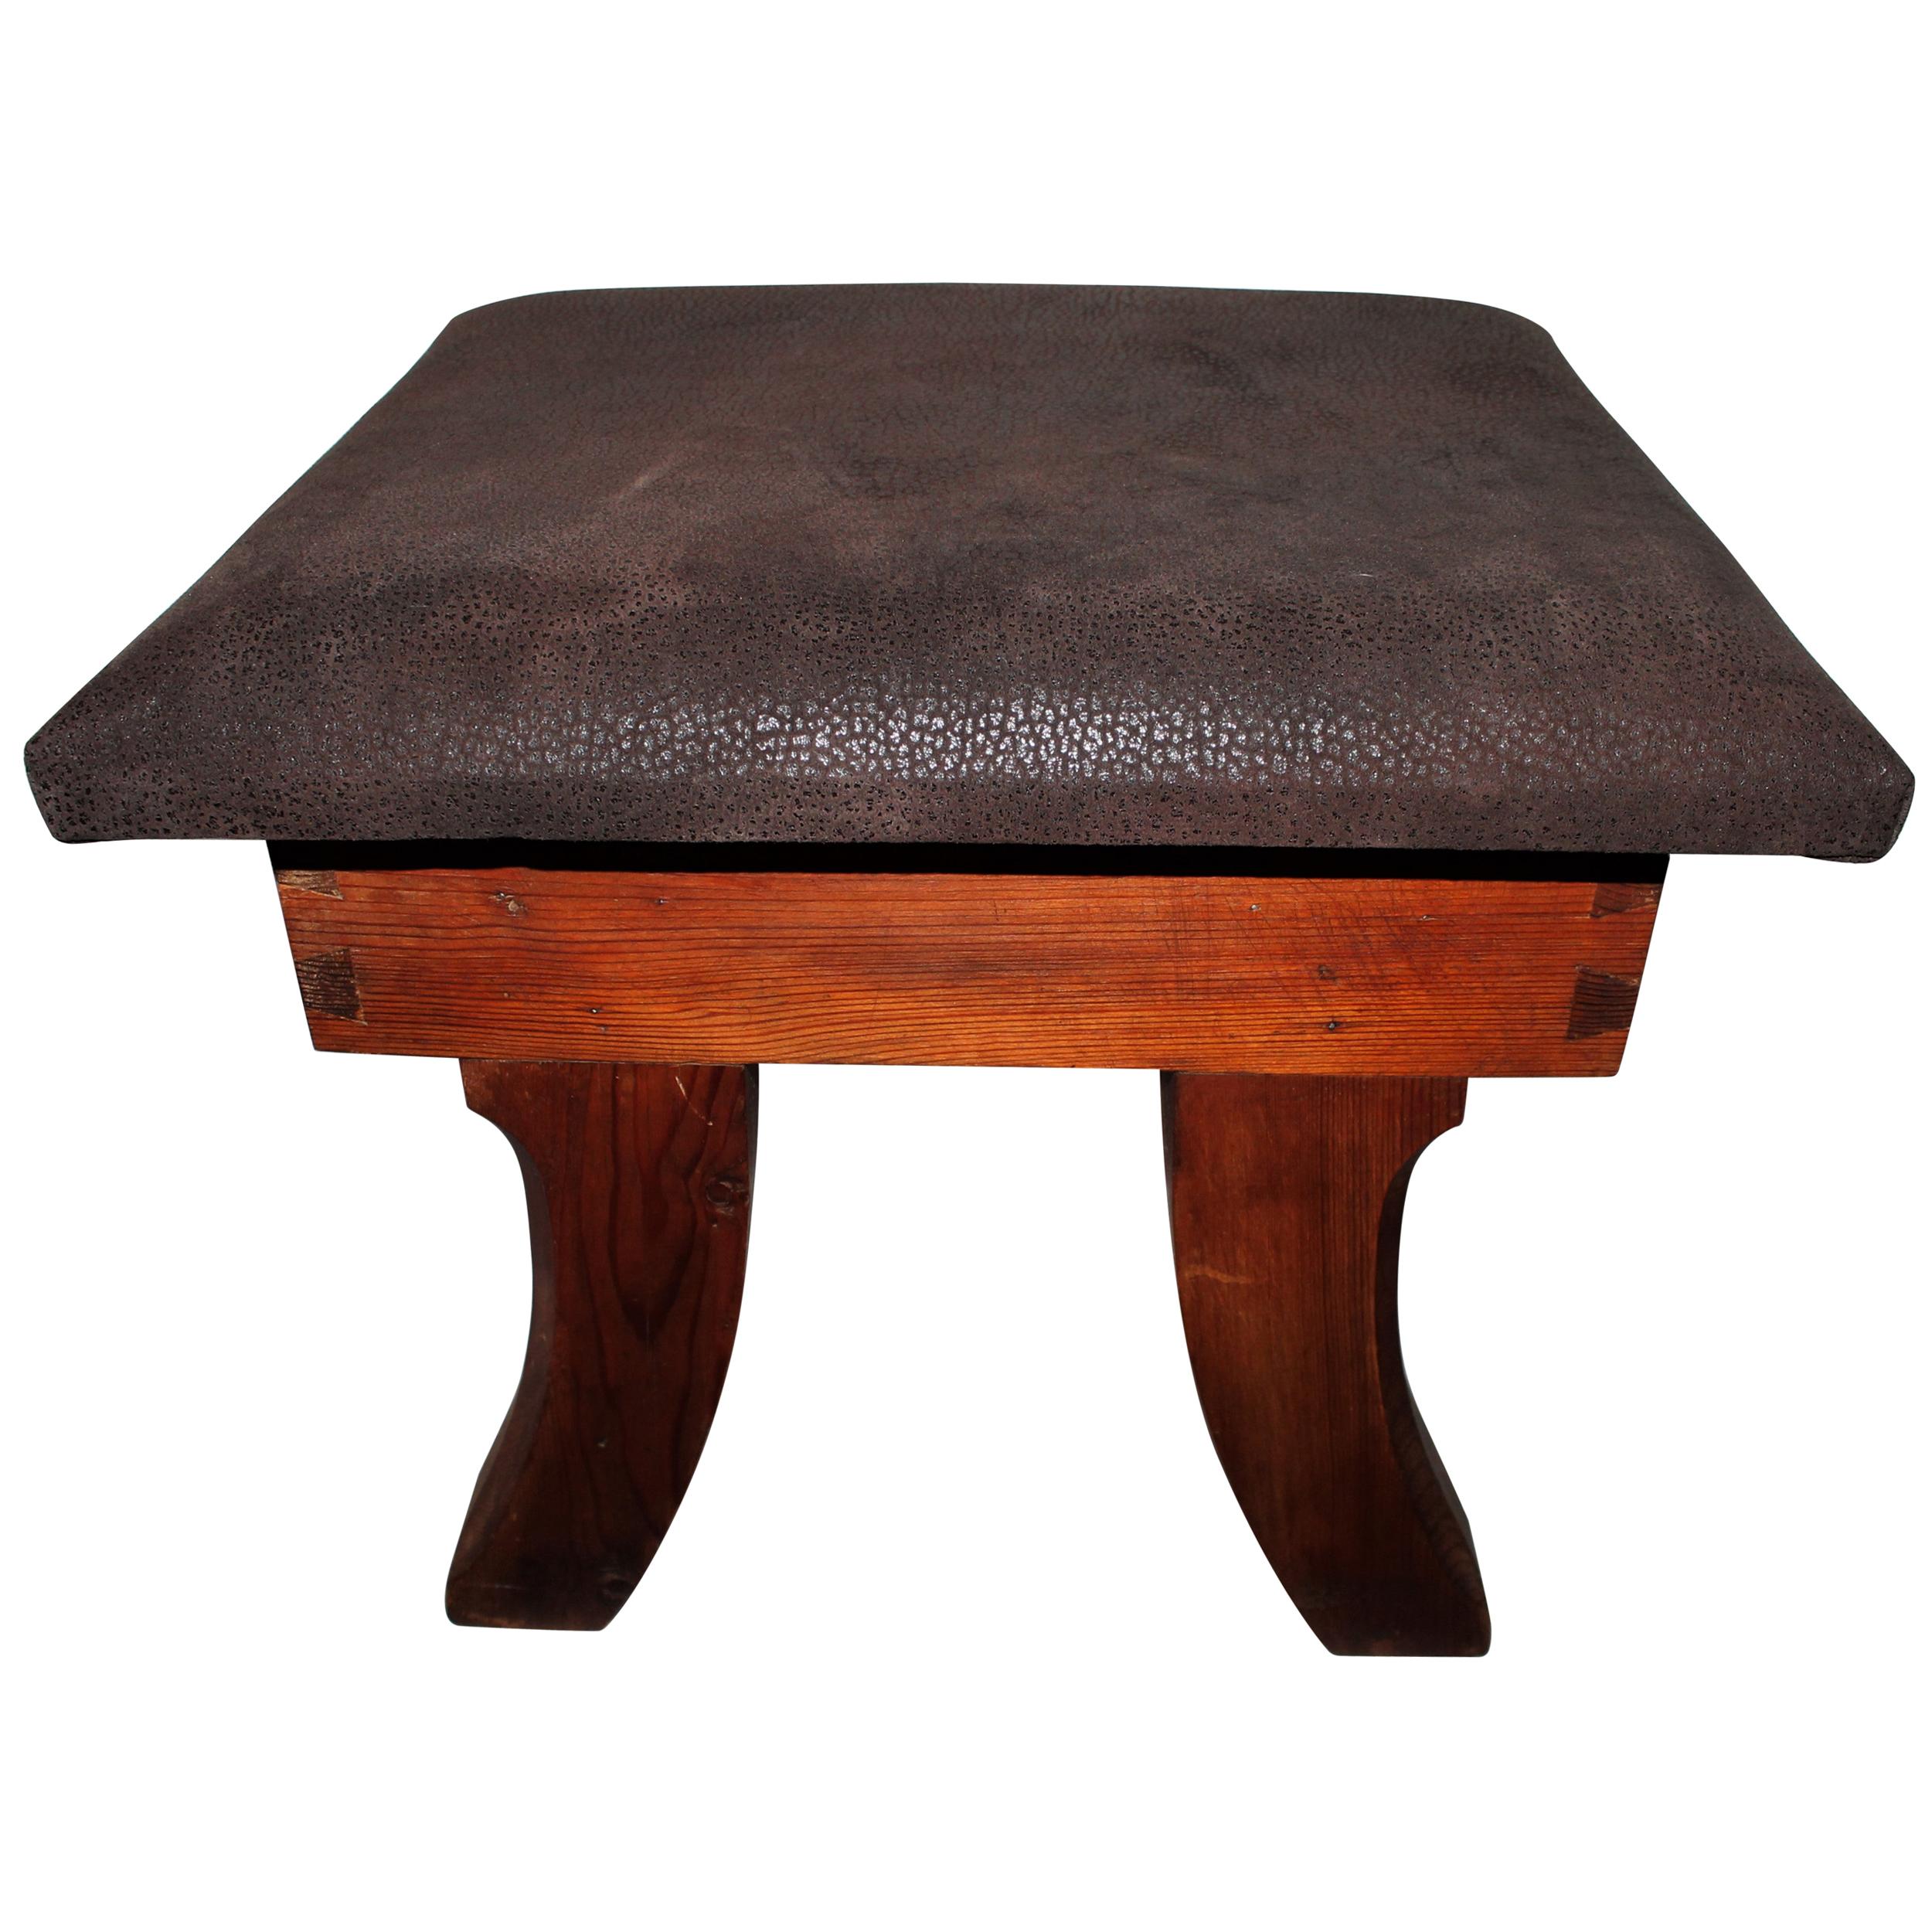 Early 20th Century Leather Covered Stool